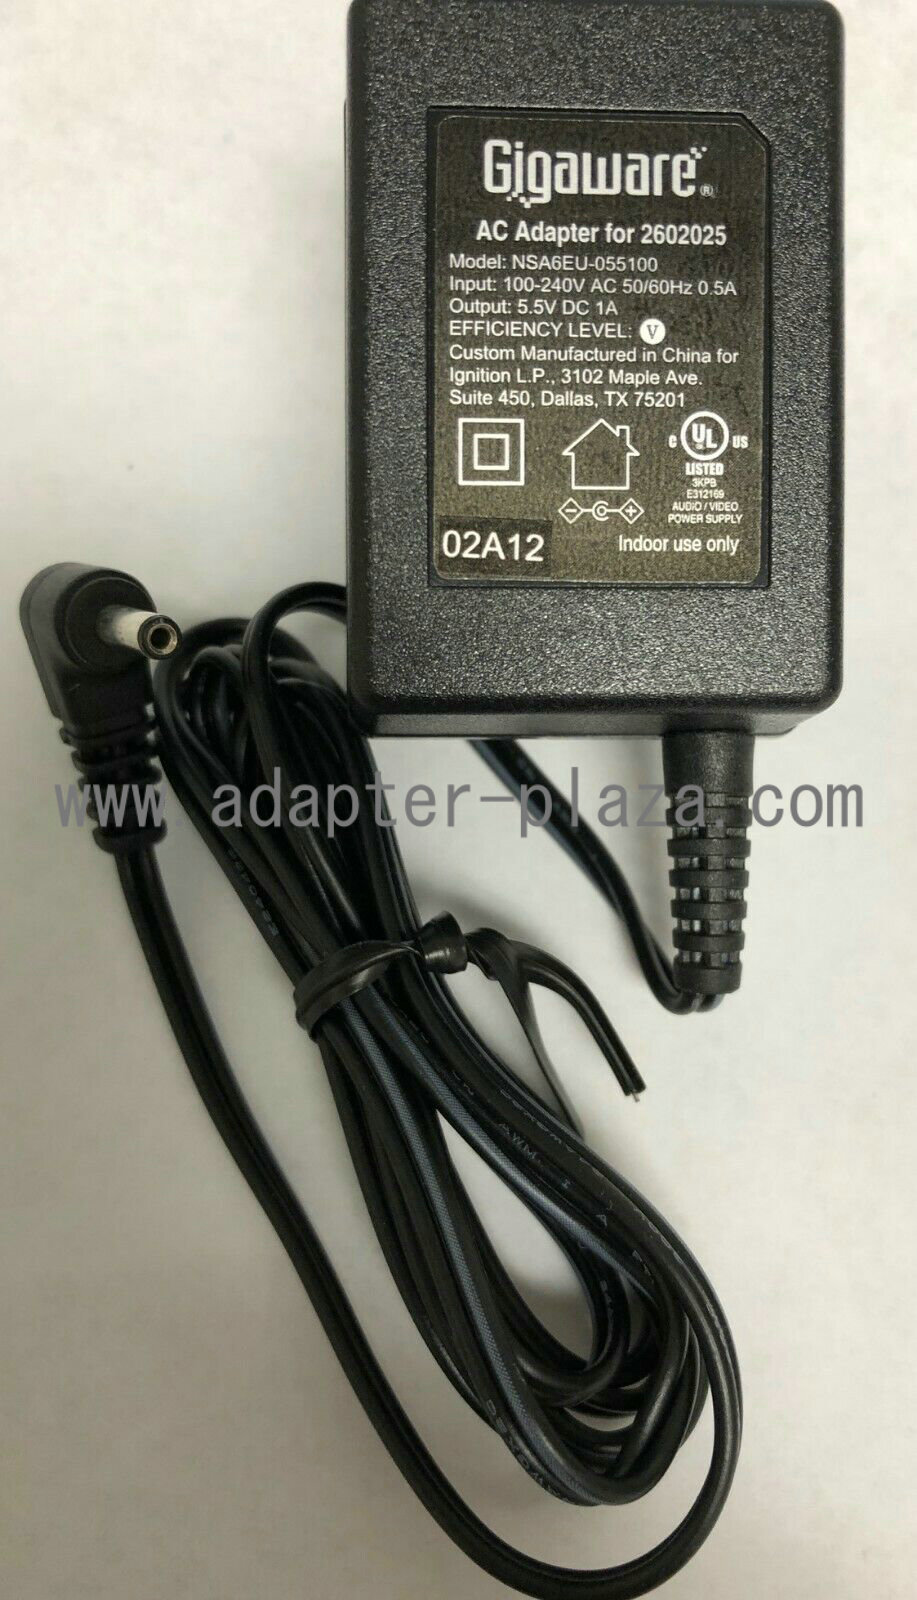 *Brand NEW*Gigaware NSA6EU-055100 Ac Adapter for 2602025 DC 5.5V 1A AC DC Adapter POWER SUPPLY